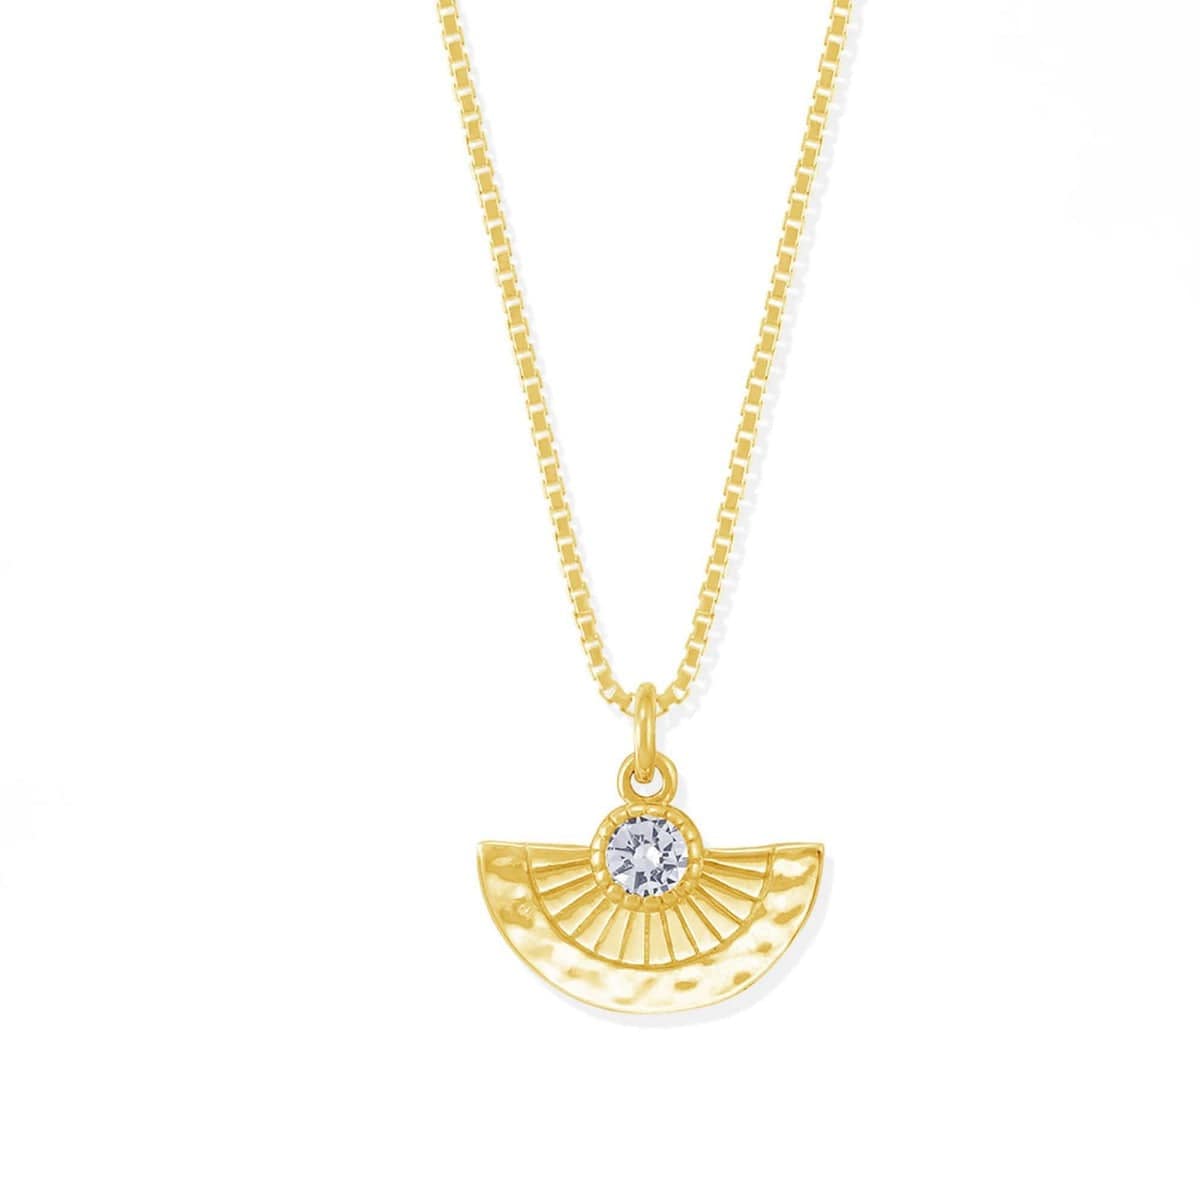 Boma Jewelry Necklaces 14K Gold Vermeil with White Topaz Nia Fan Necklace